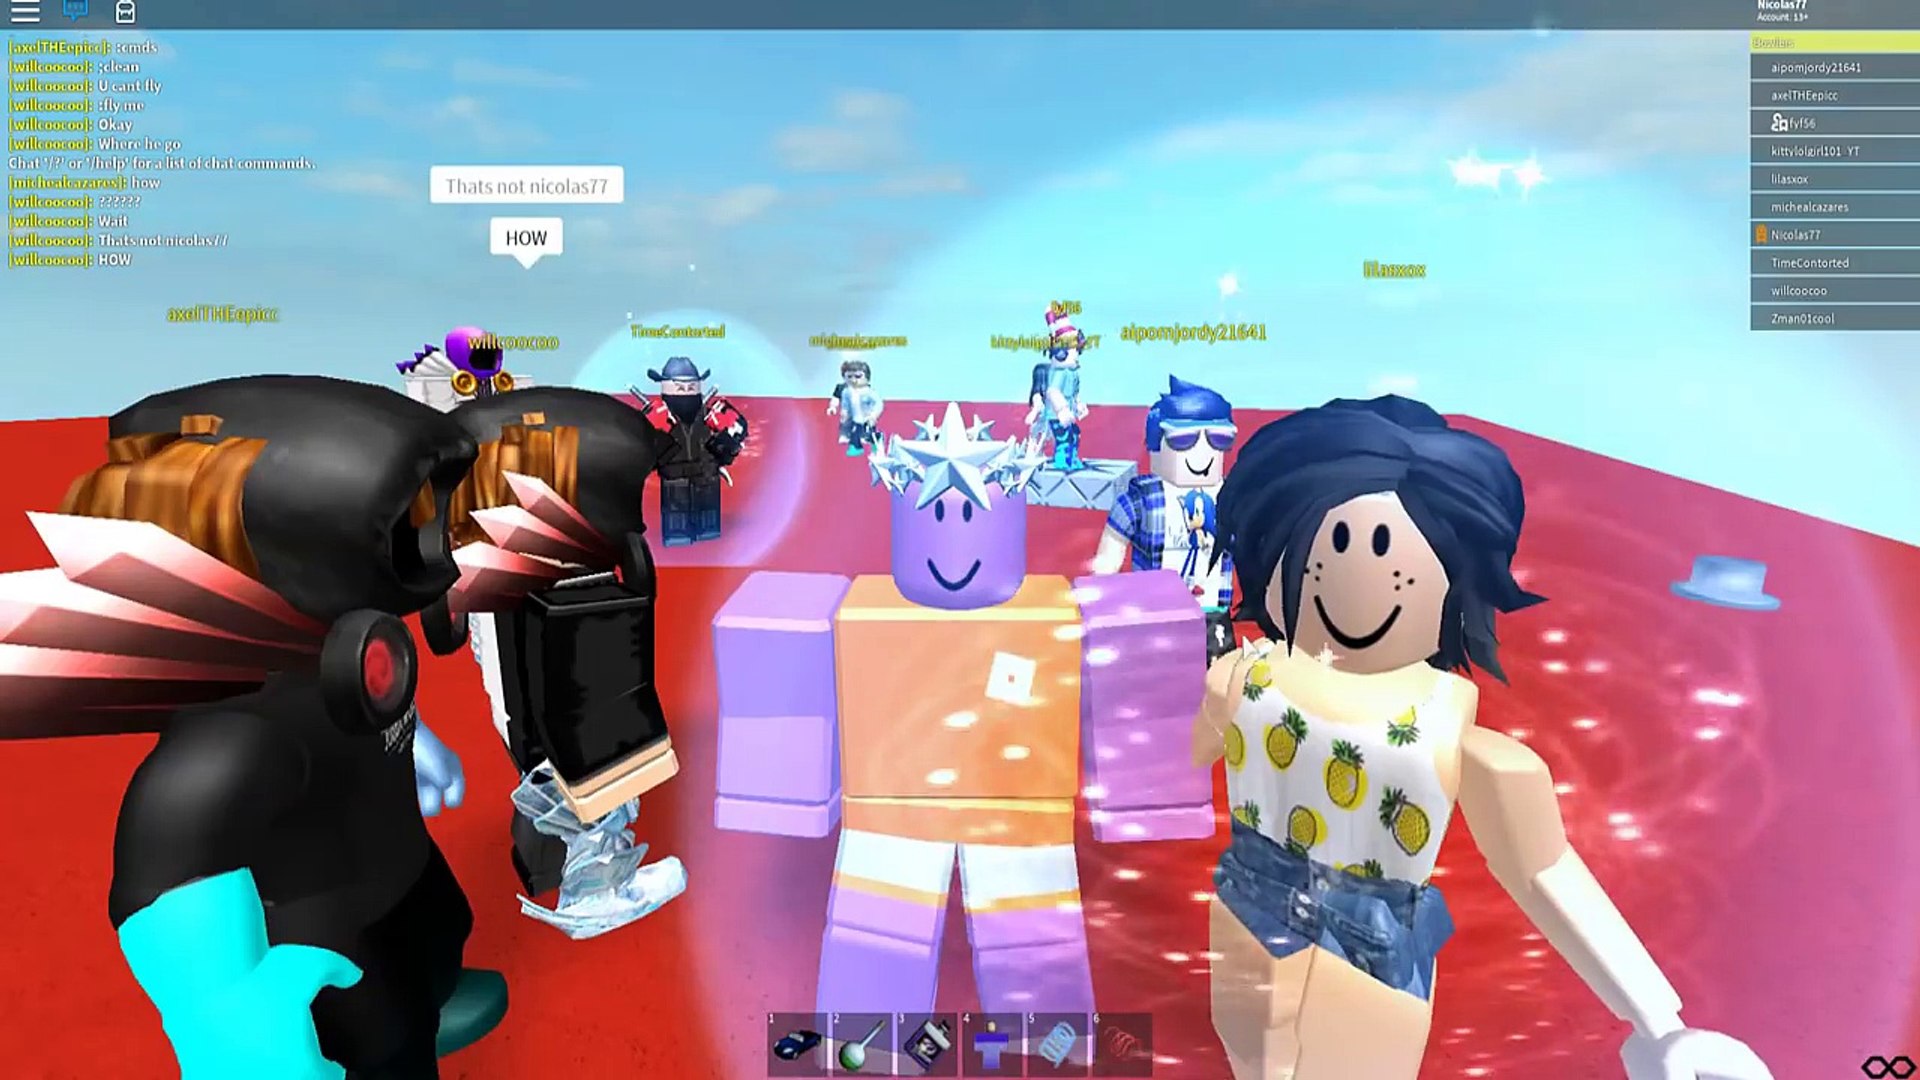 I Gave A Noob 10000 Robux Then This Happened Roblox - nicolas77 roblox game